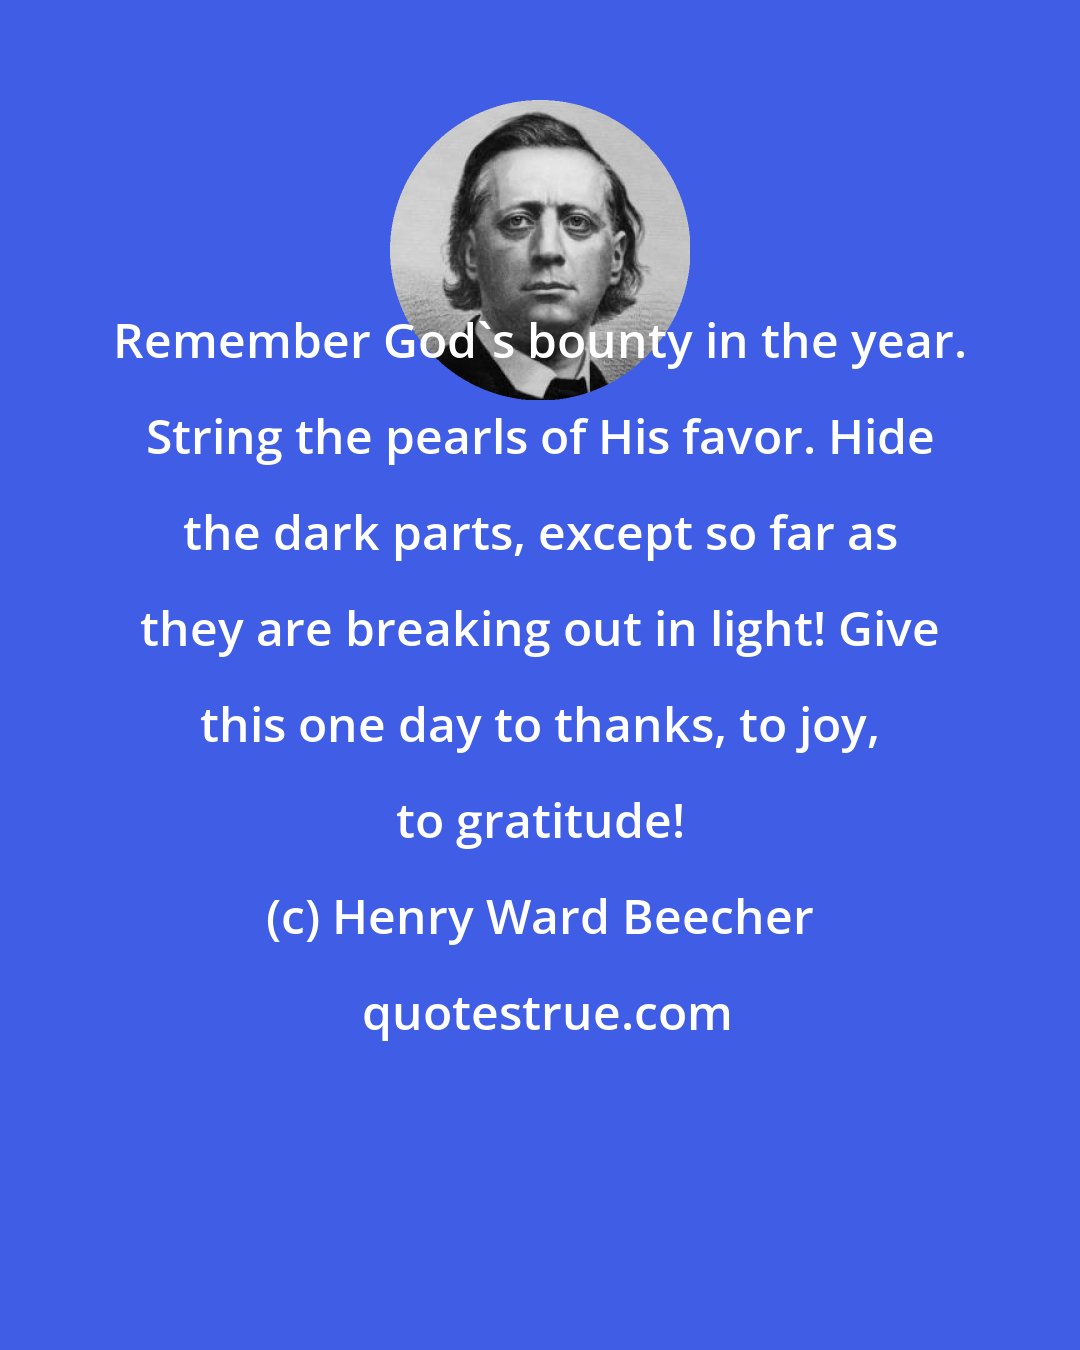 Henry Ward Beecher: Remember God's bounty in the year. String the pearls of His favor. Hide the dark parts, except so far as they are breaking out in light! Give this one day to thanks, to joy, to gratitude!